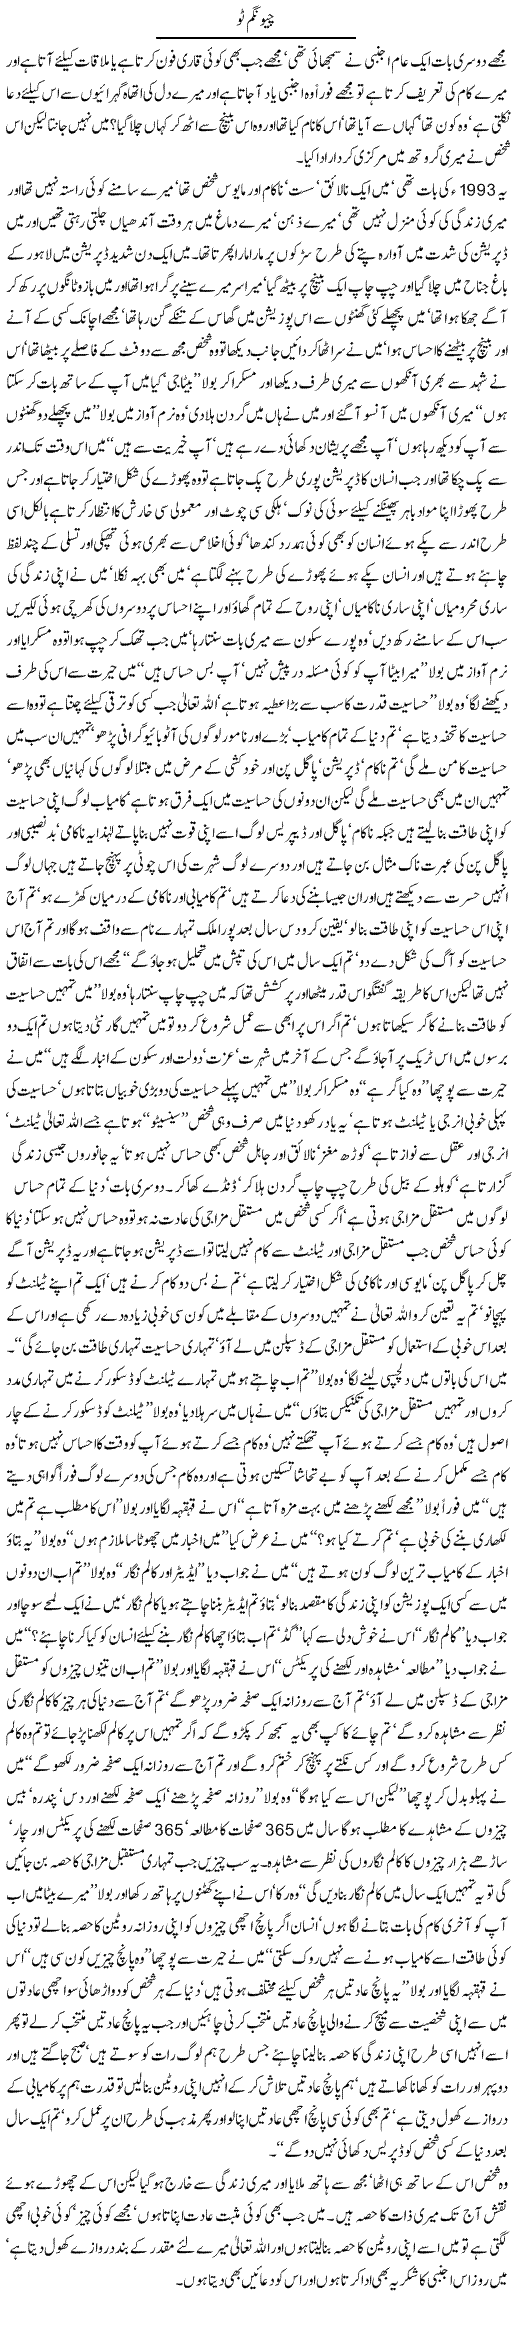 Chewing Gum Express Column Javed Chaudhry 18 July 2010